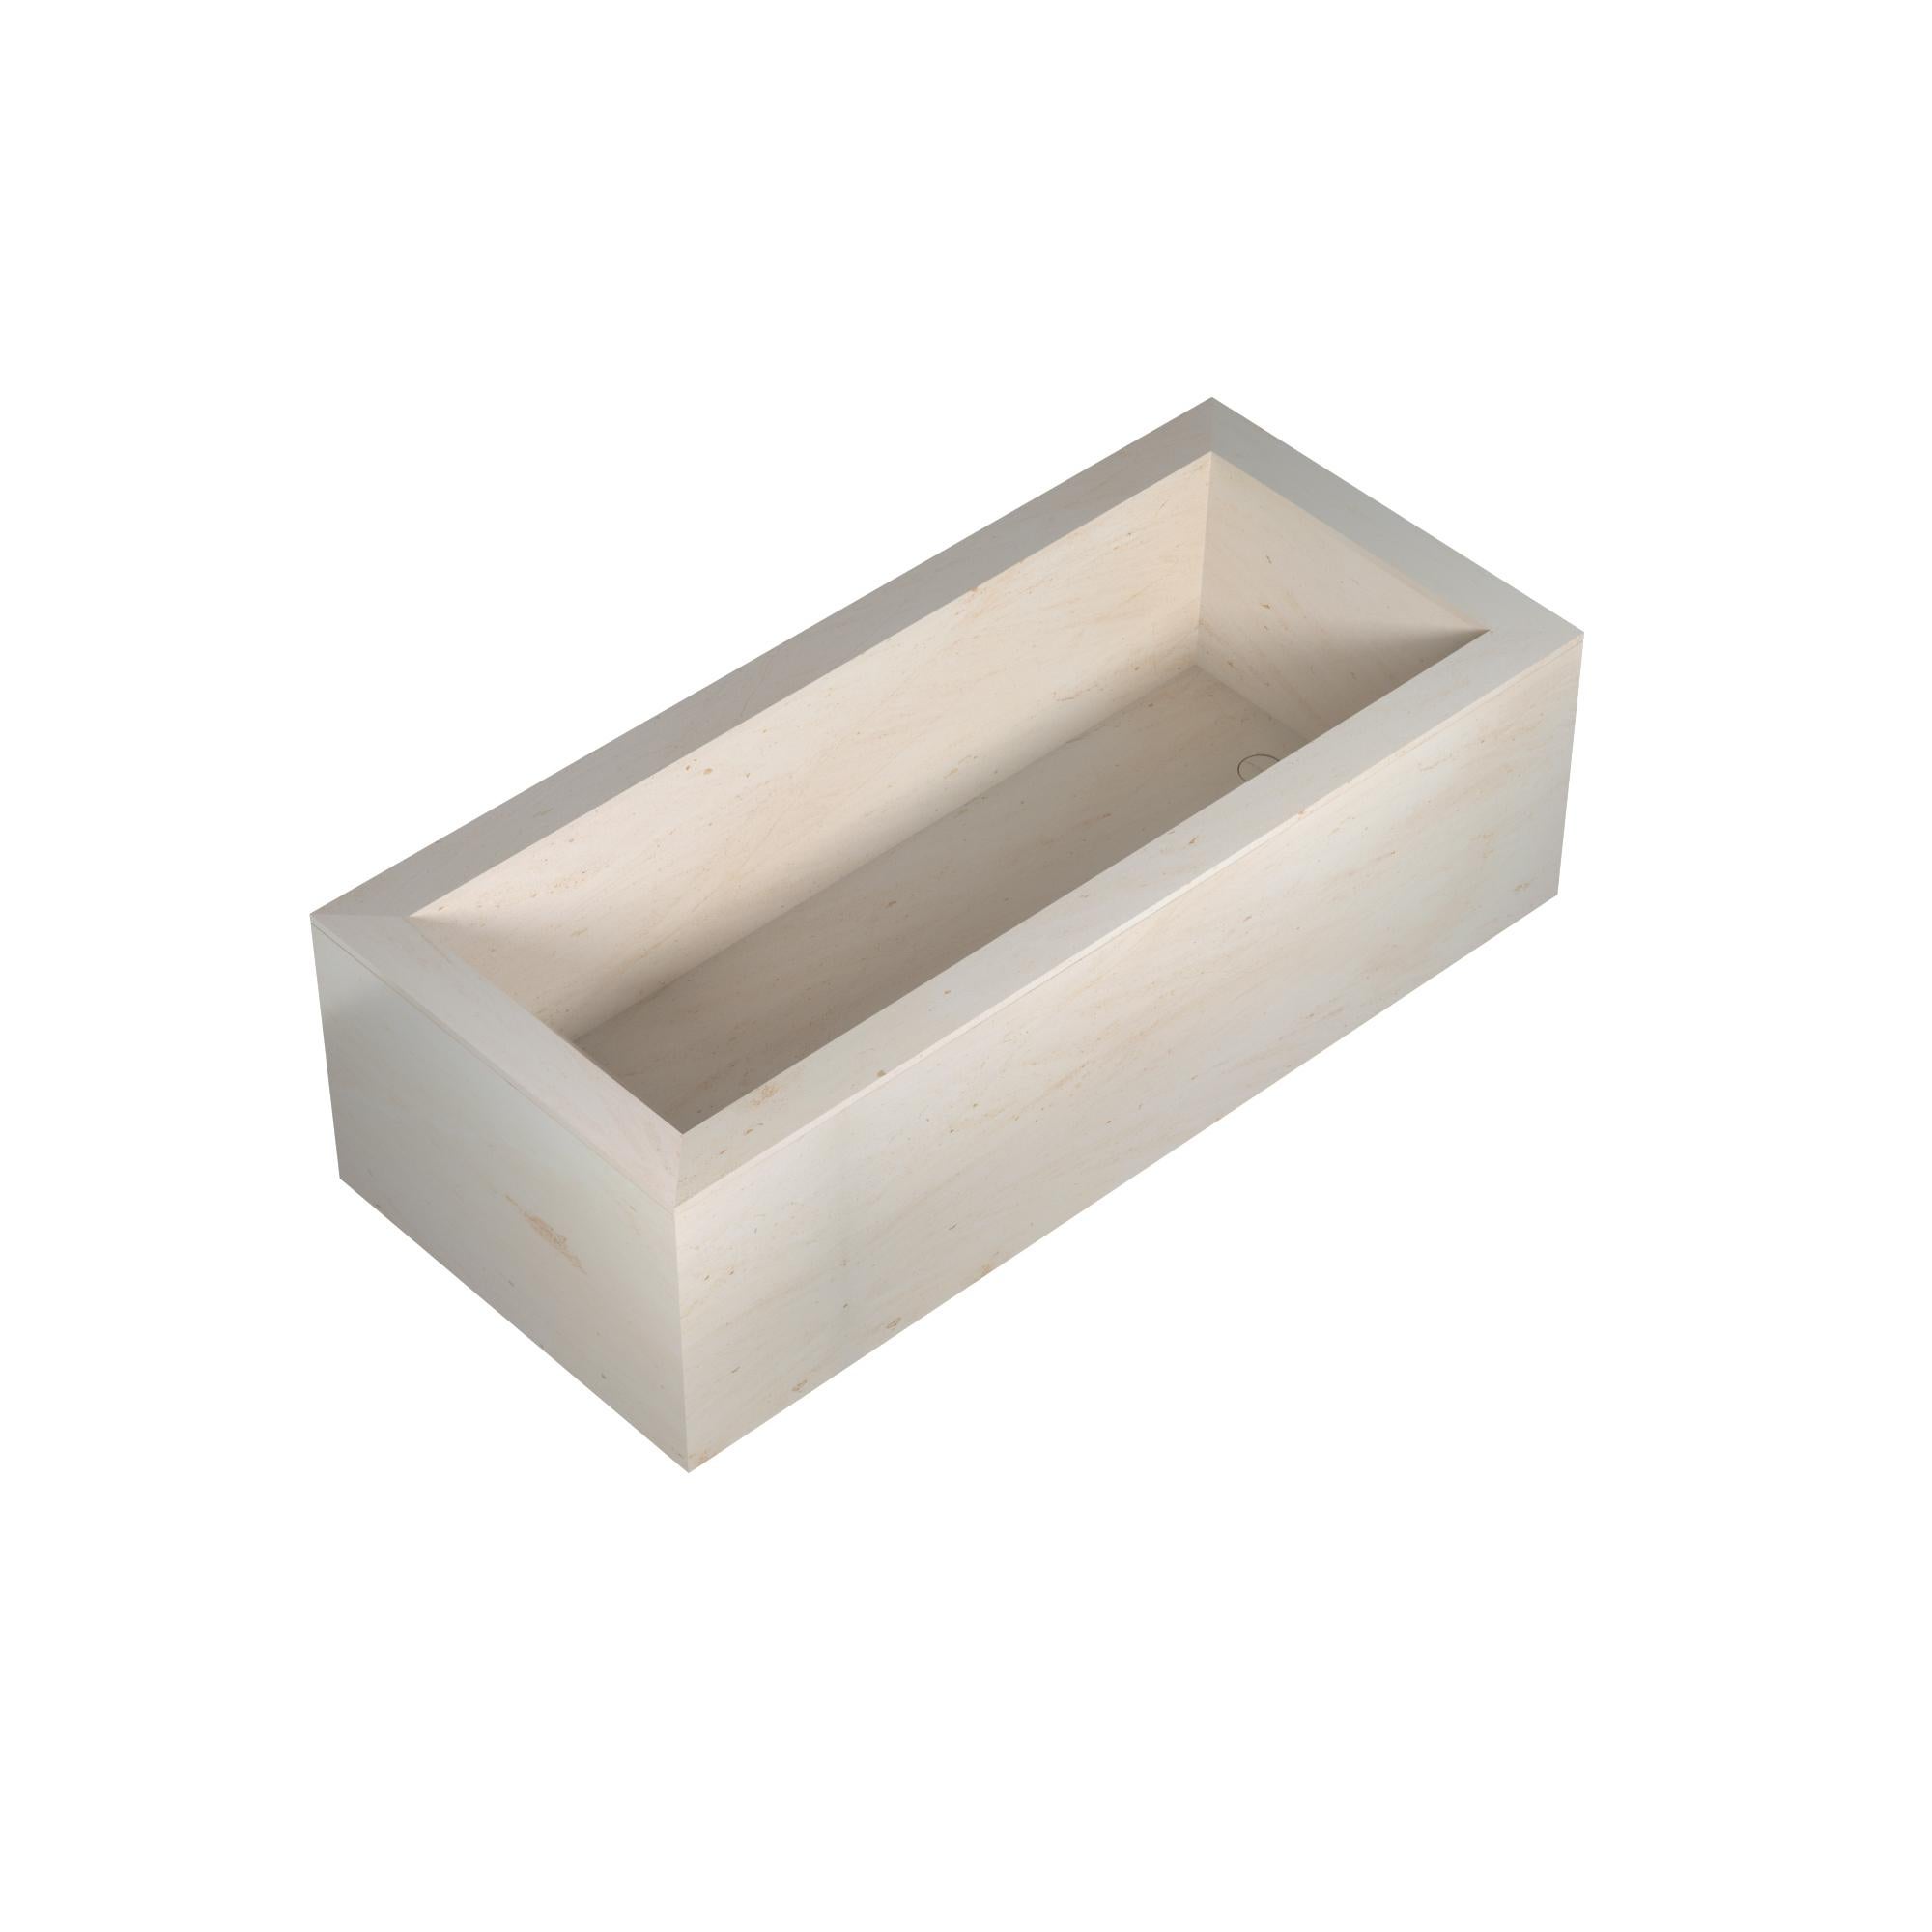 Completely wrapped in natural stone, the Oyster bathtub could be described as a “design your own tub”.

With its beautifully simple structure, clean lines and 16 possible combinations of finish, it is the perfect starting point for a total look